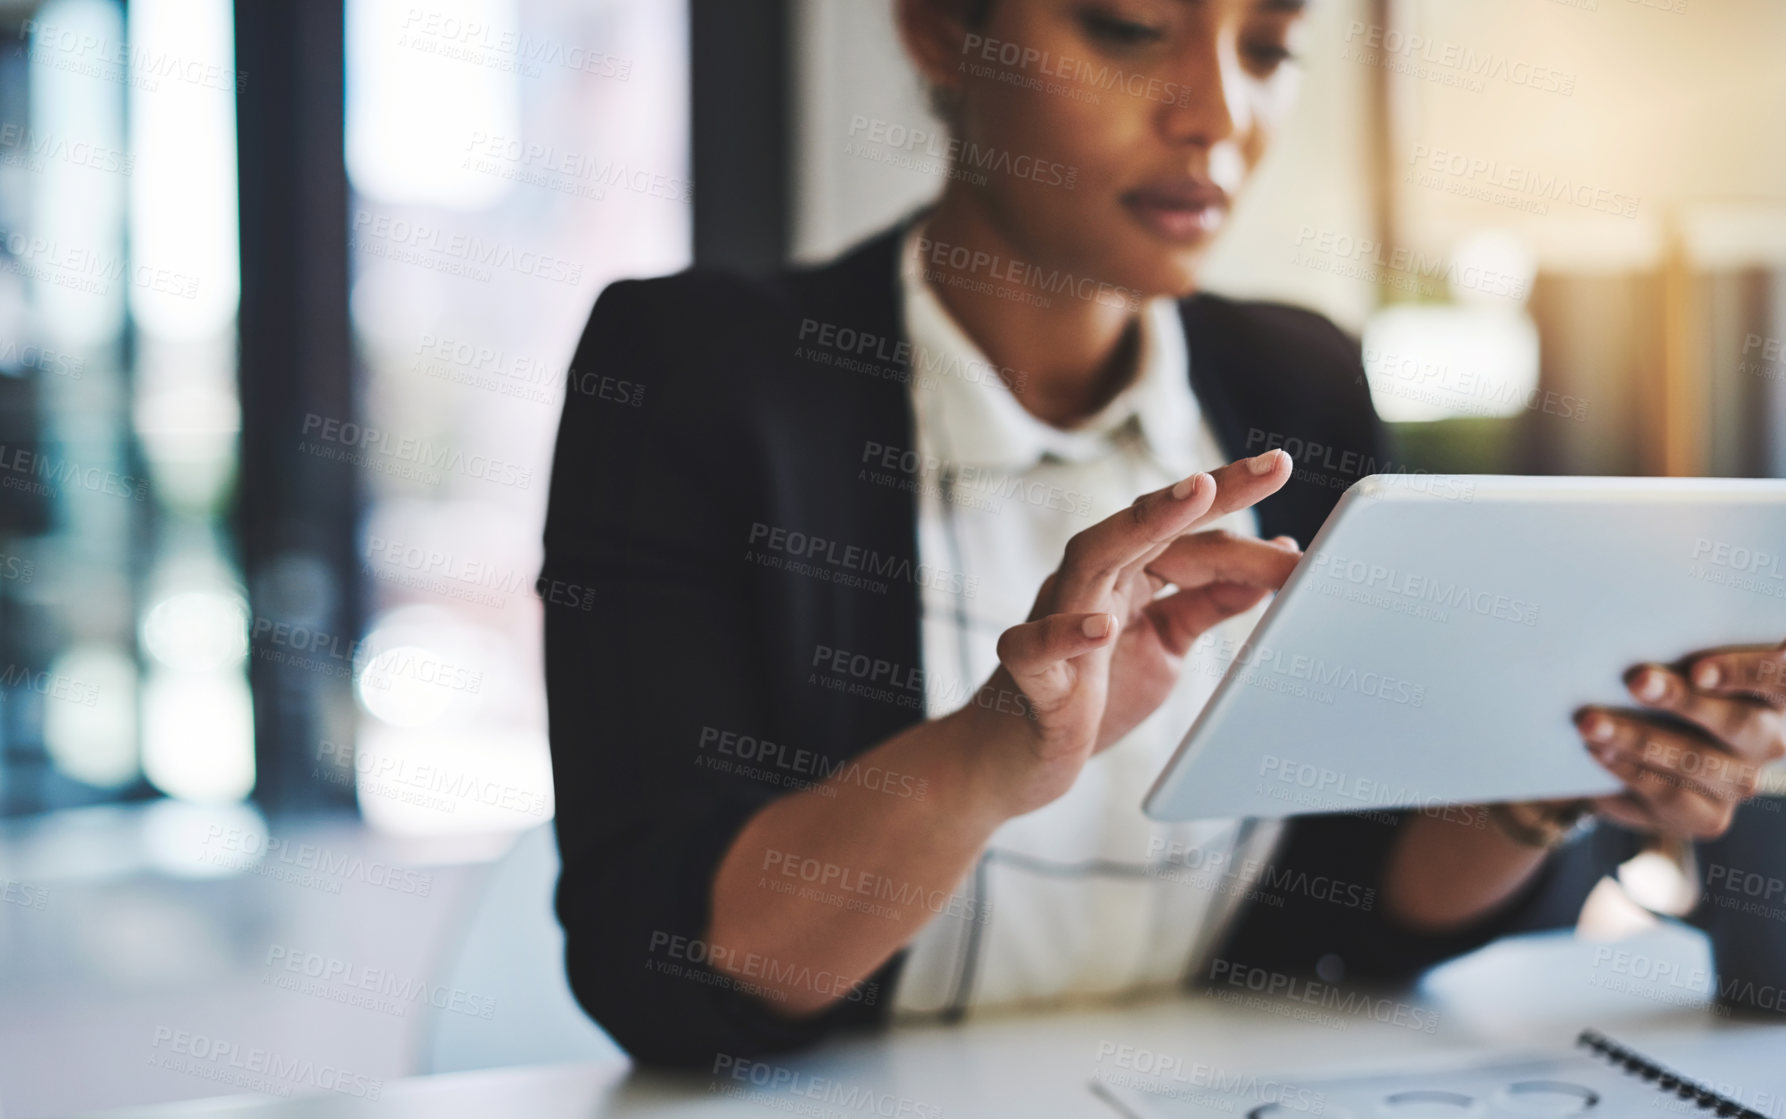 Buy stock photo Cropped shot of a young businesswoman using a digital tablet in a modern office